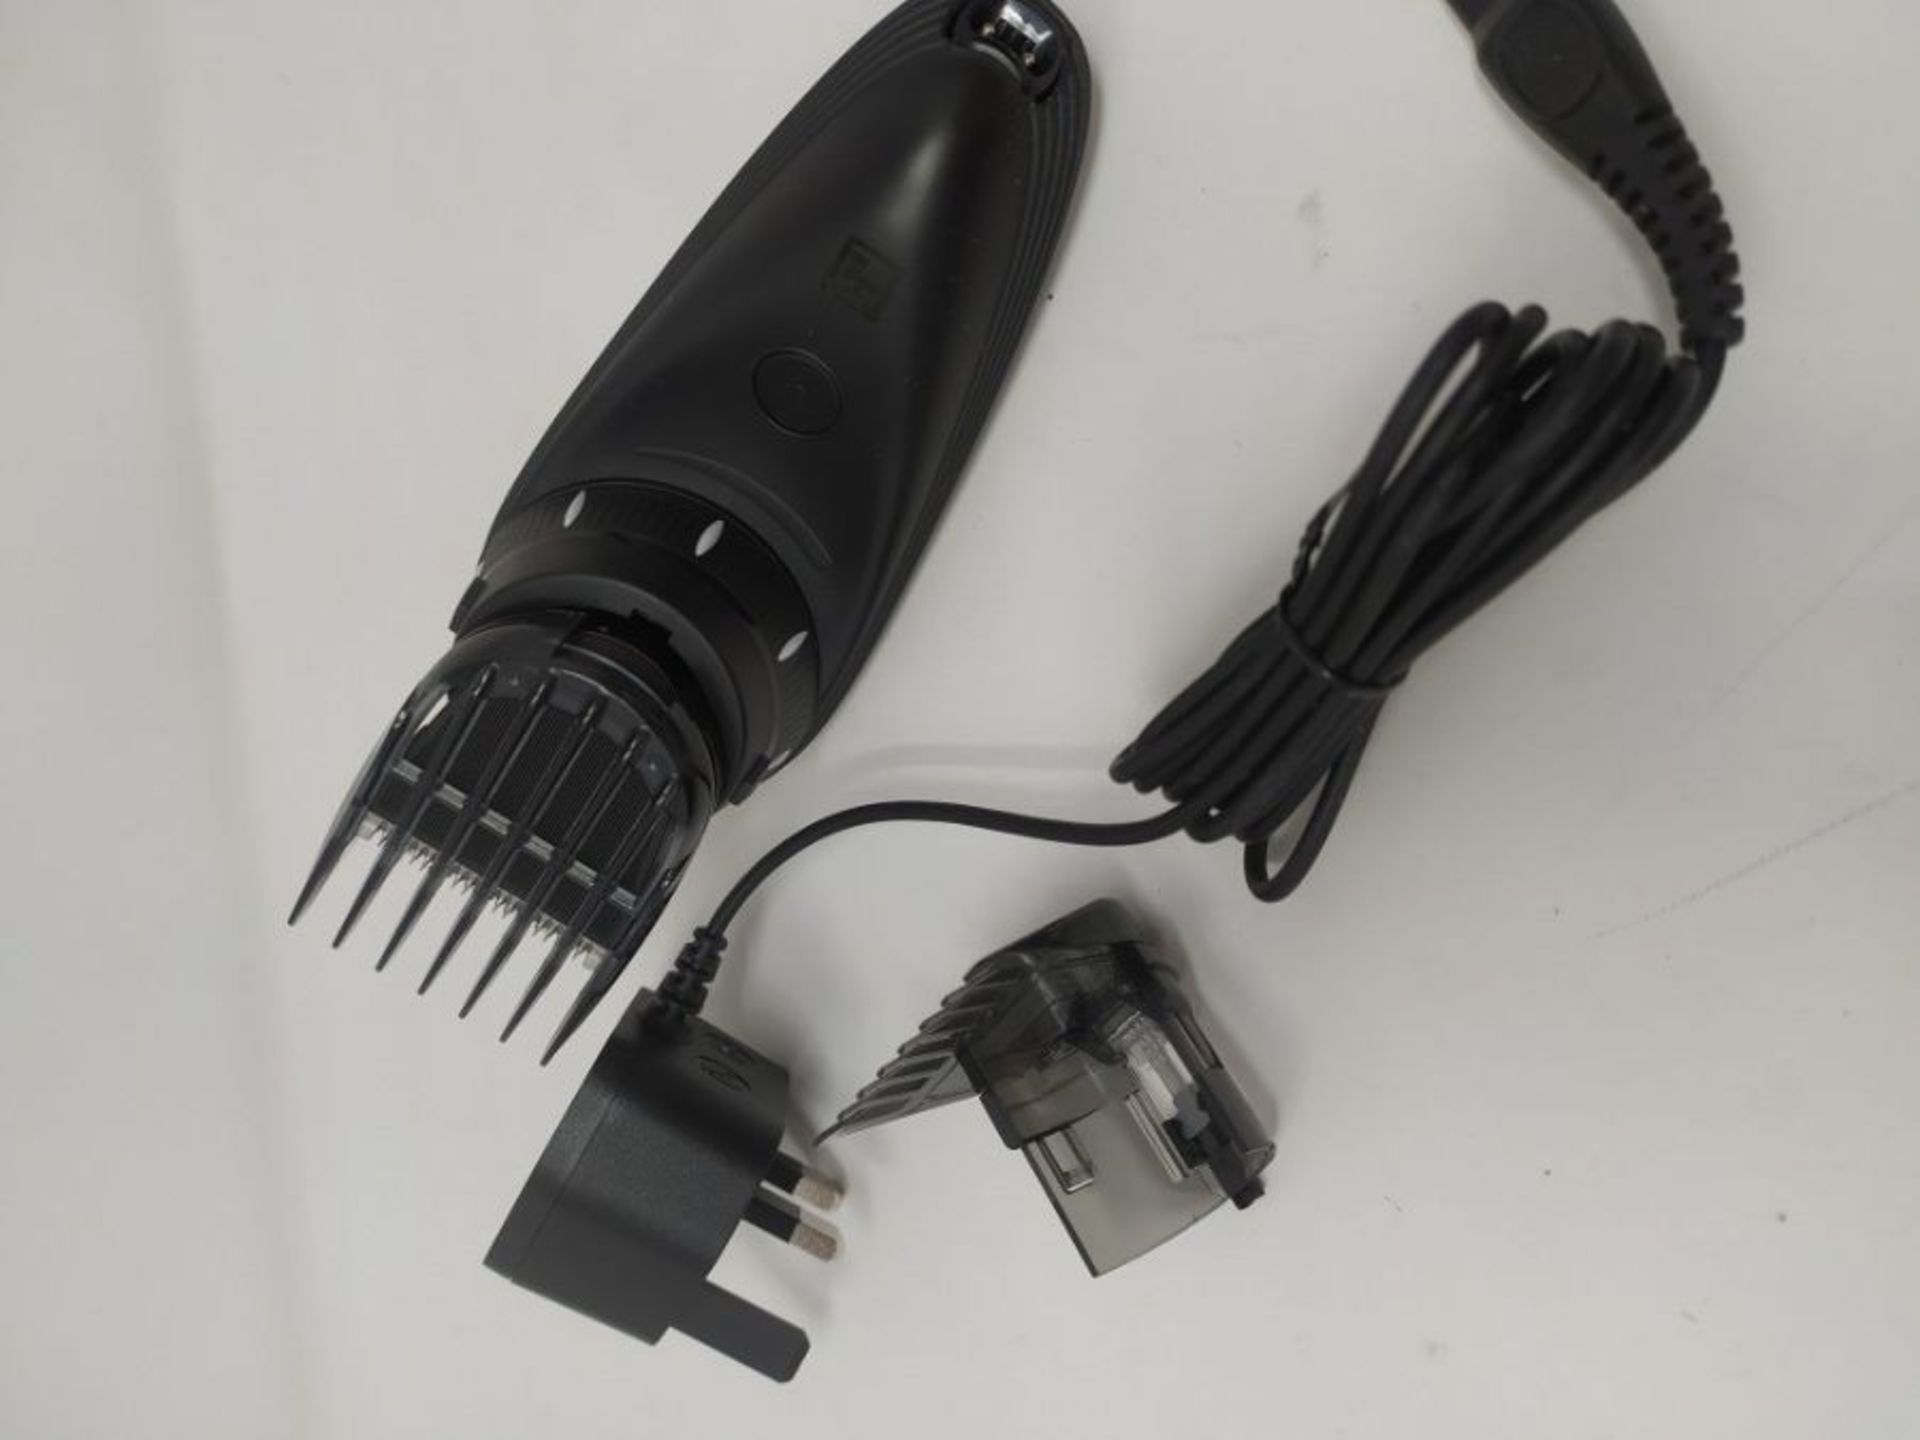 Philips Hair Clippers for Men, Do-It-Yourself Hair Cllipper with 180 Degree Rotating H - Image 2 of 2